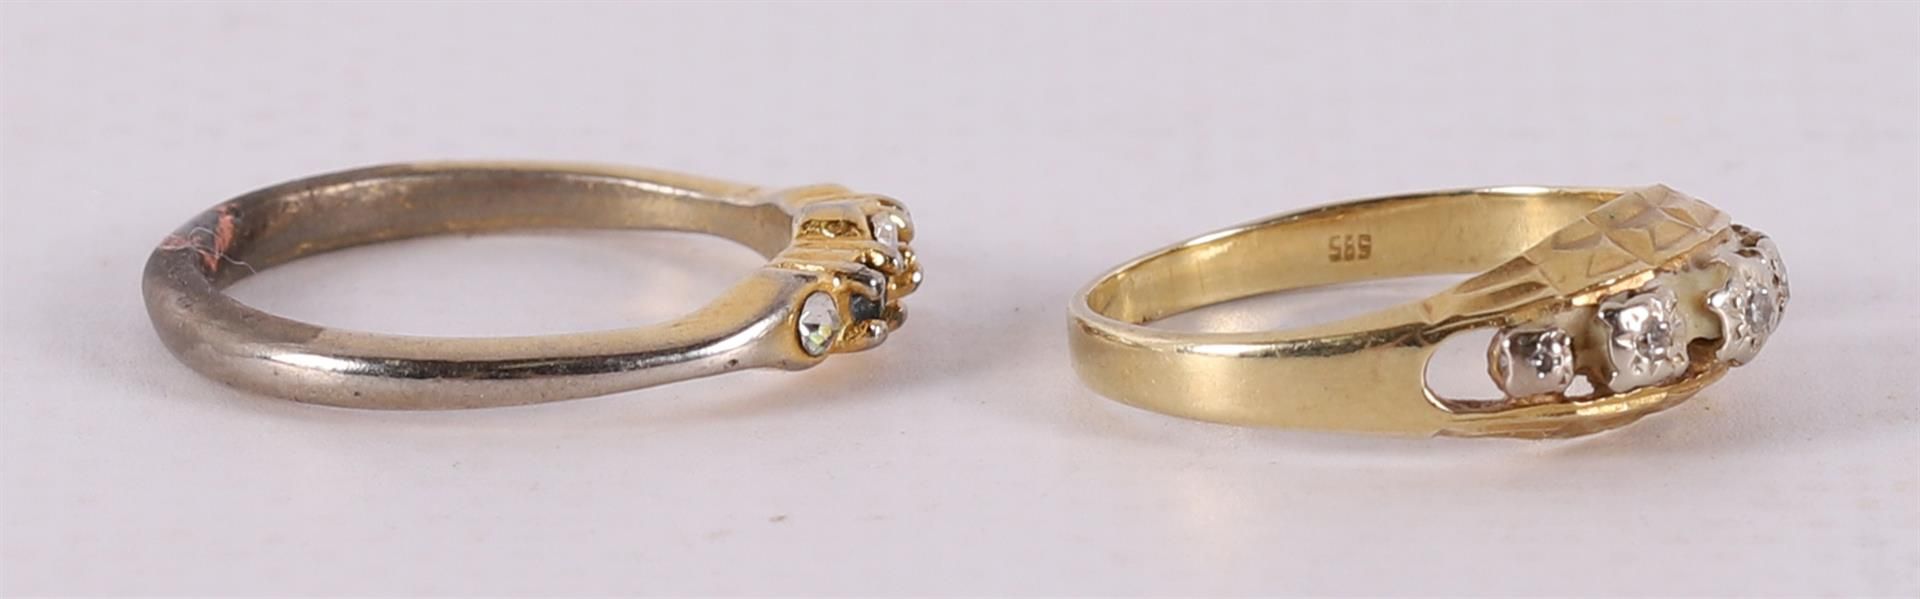 A 14 kt yellow gold ring set with five brilliant cut diamonds, - Image 2 of 2